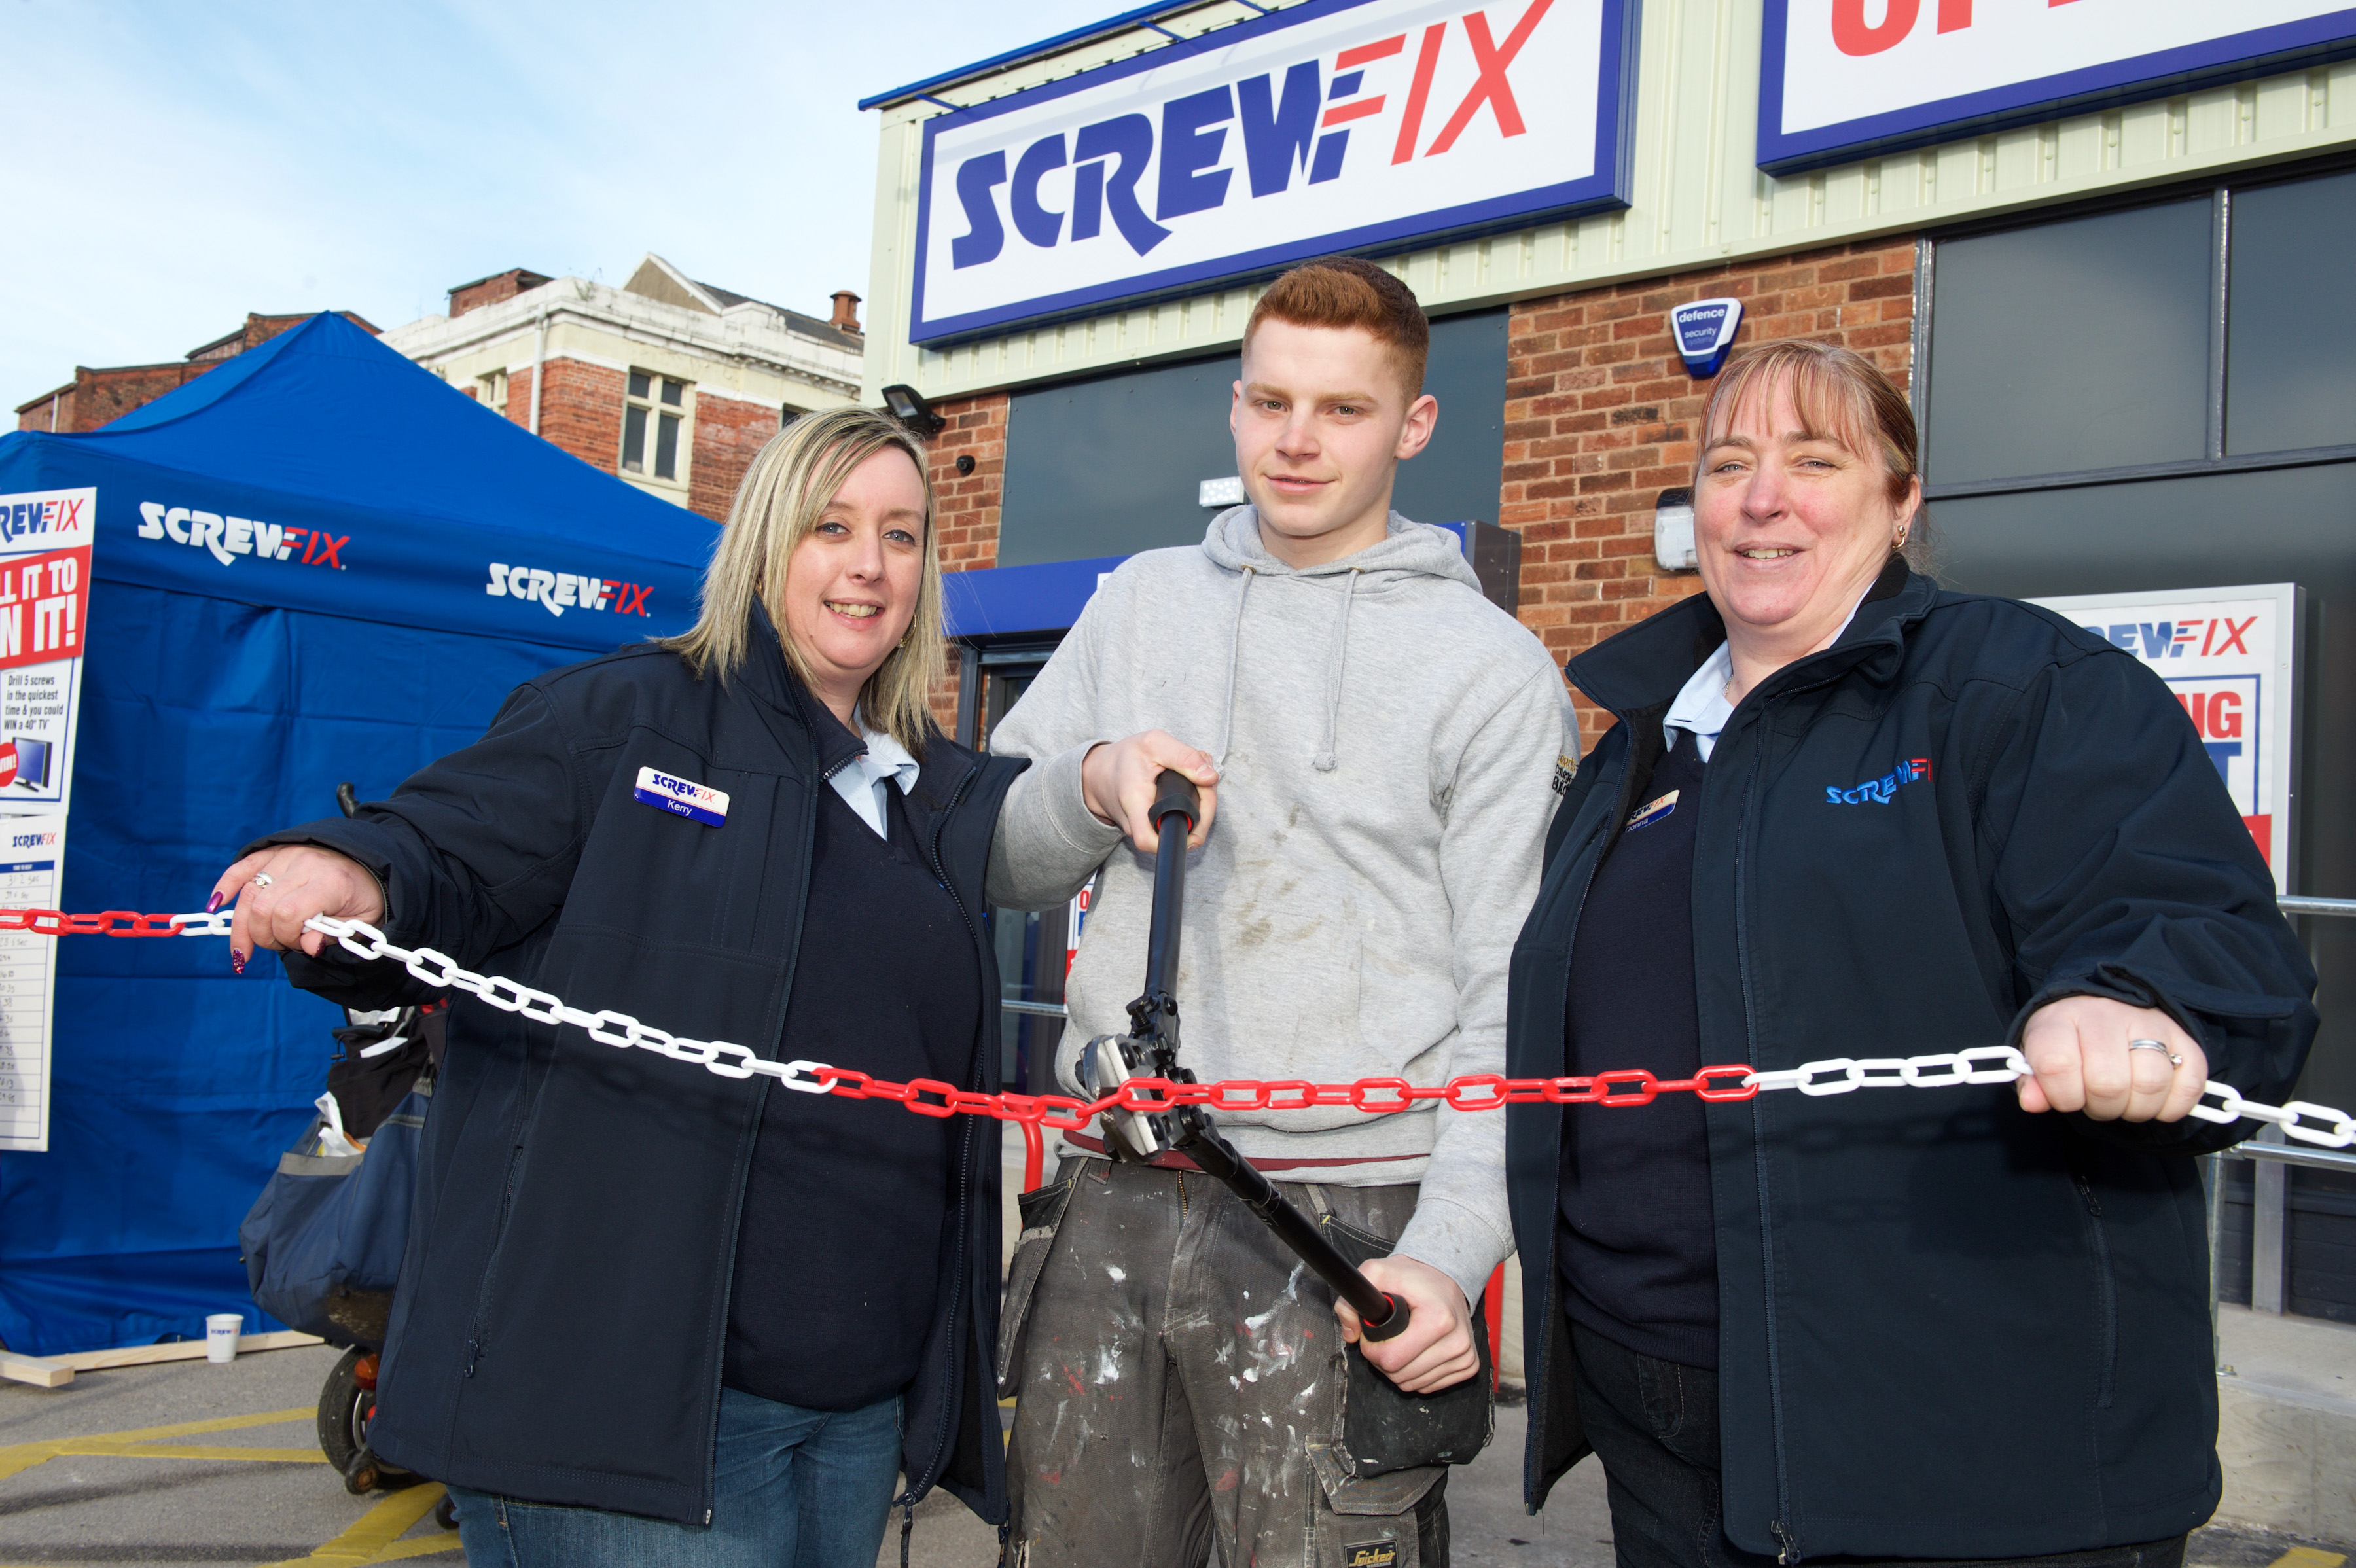 Worksop’s first Screwfix store is declared a runaway success